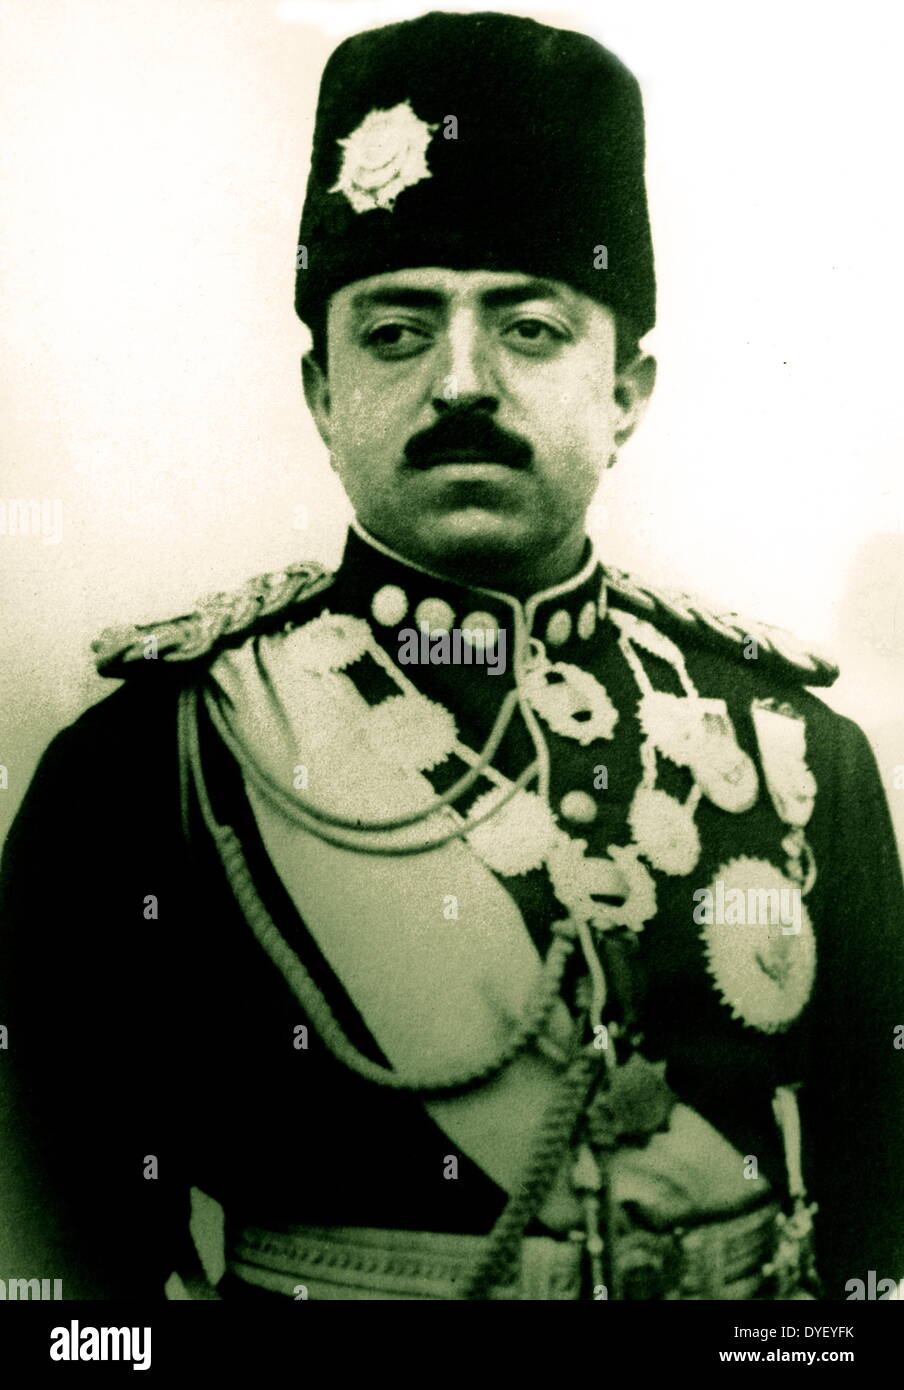 Photograph of King Amanullah Khan (1892-1960). Date of photograph circa 1919-1930. The first Afghan ruler to try and modernize Afghanistan to Western designs. Fled to British India when Civil war broke out. Died in 1960. Stock Photo